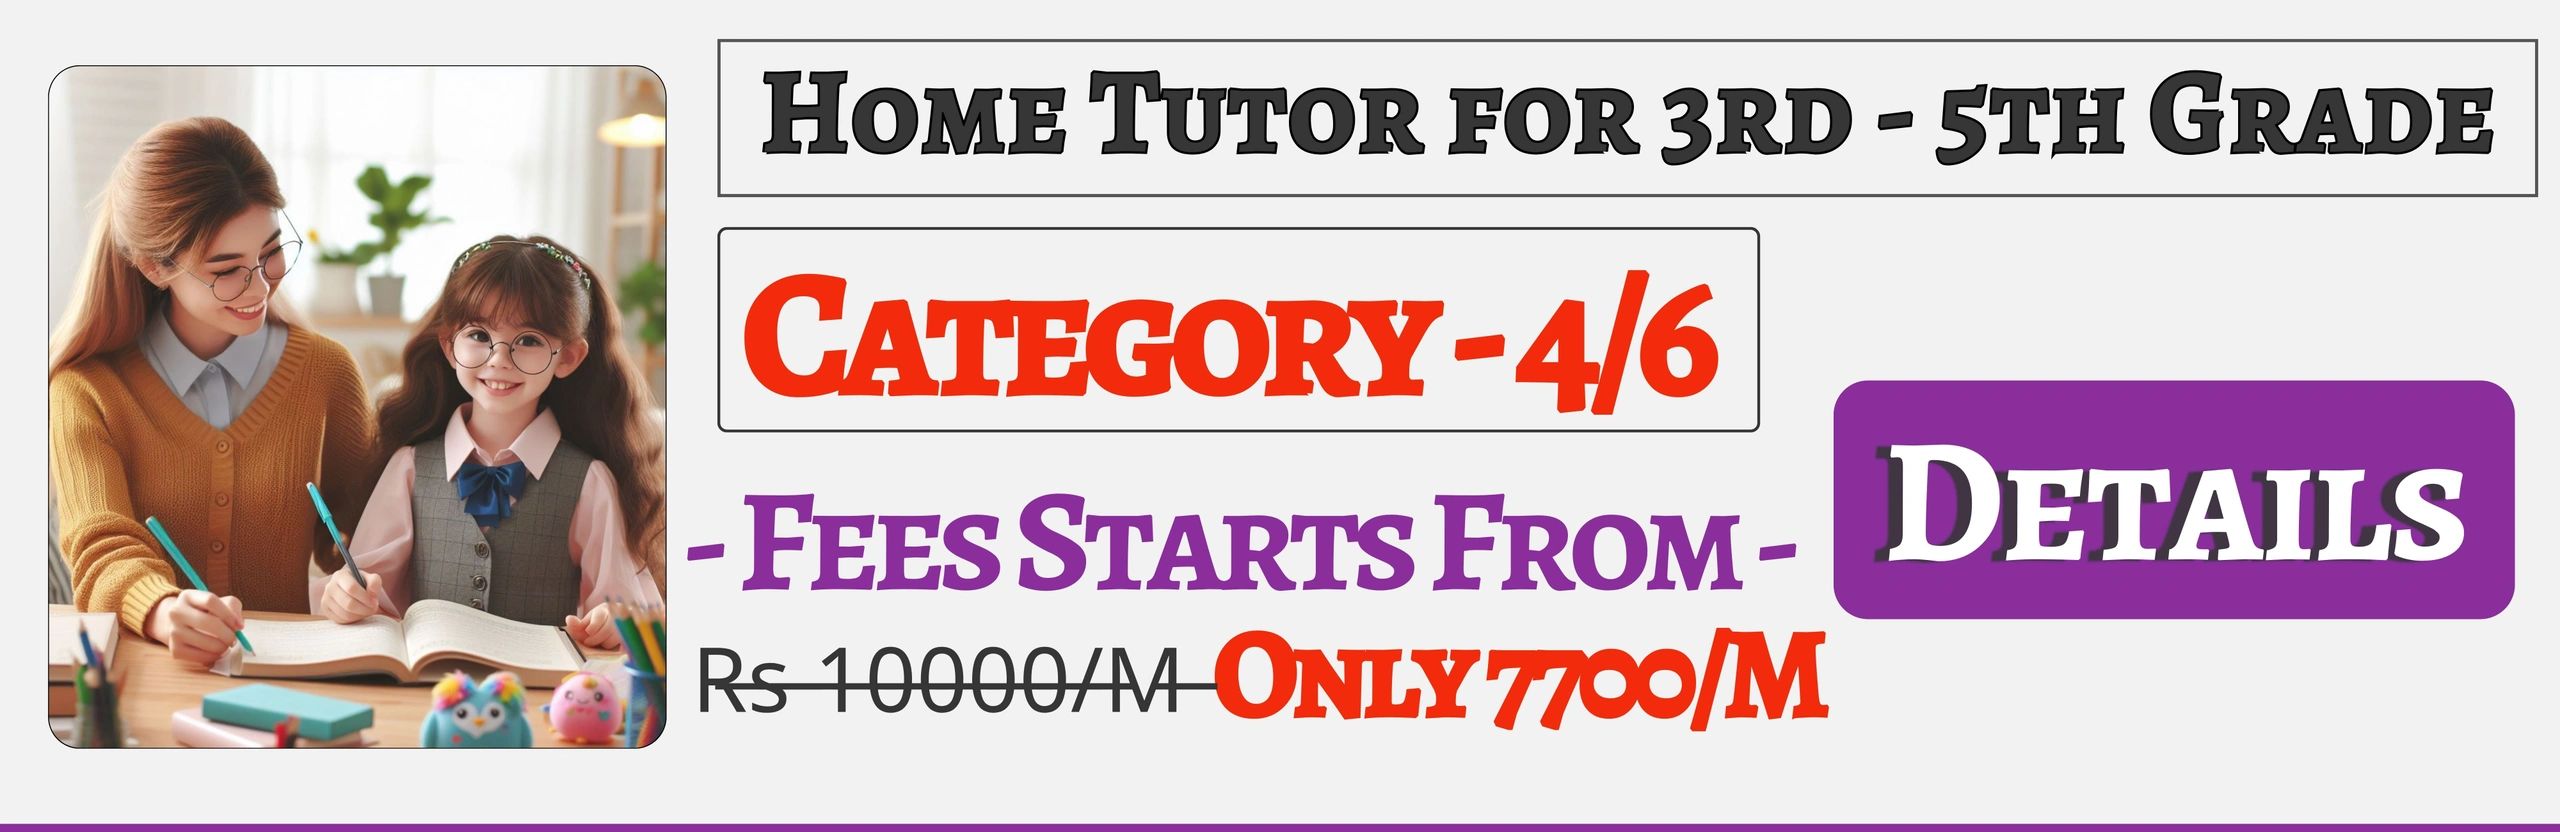 Book Best Home Tuition Tutors For 3rd , 4th & 5th In Jaipur , Fees Only 7700/M